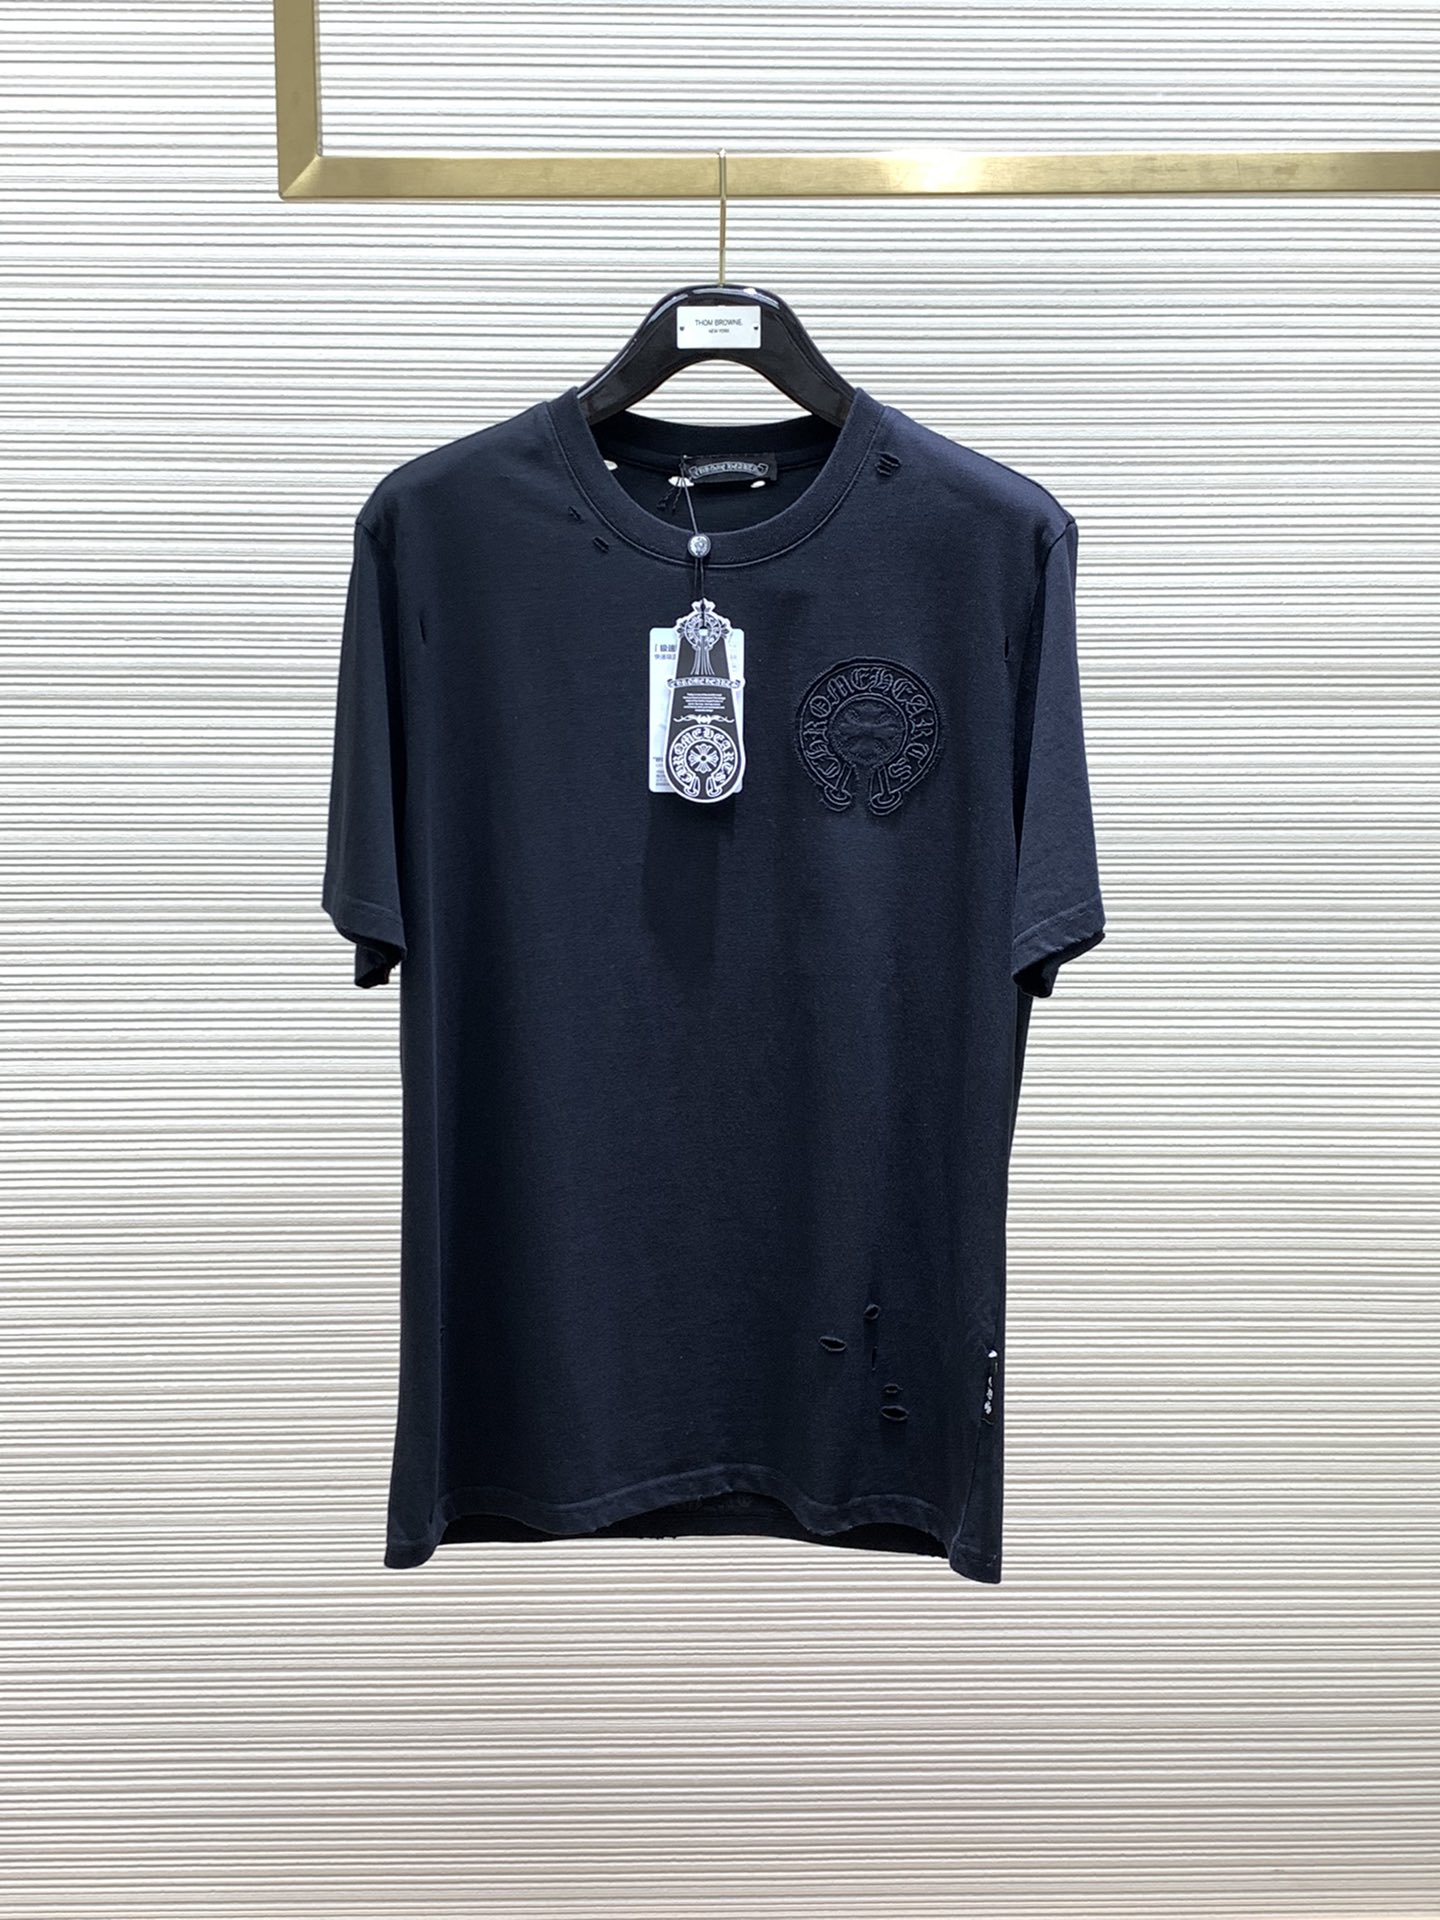 Chrome Hearts Clothing T-Shirt Buy Cheap
 Embroidery Summer Collection Fashion Short Sleeve